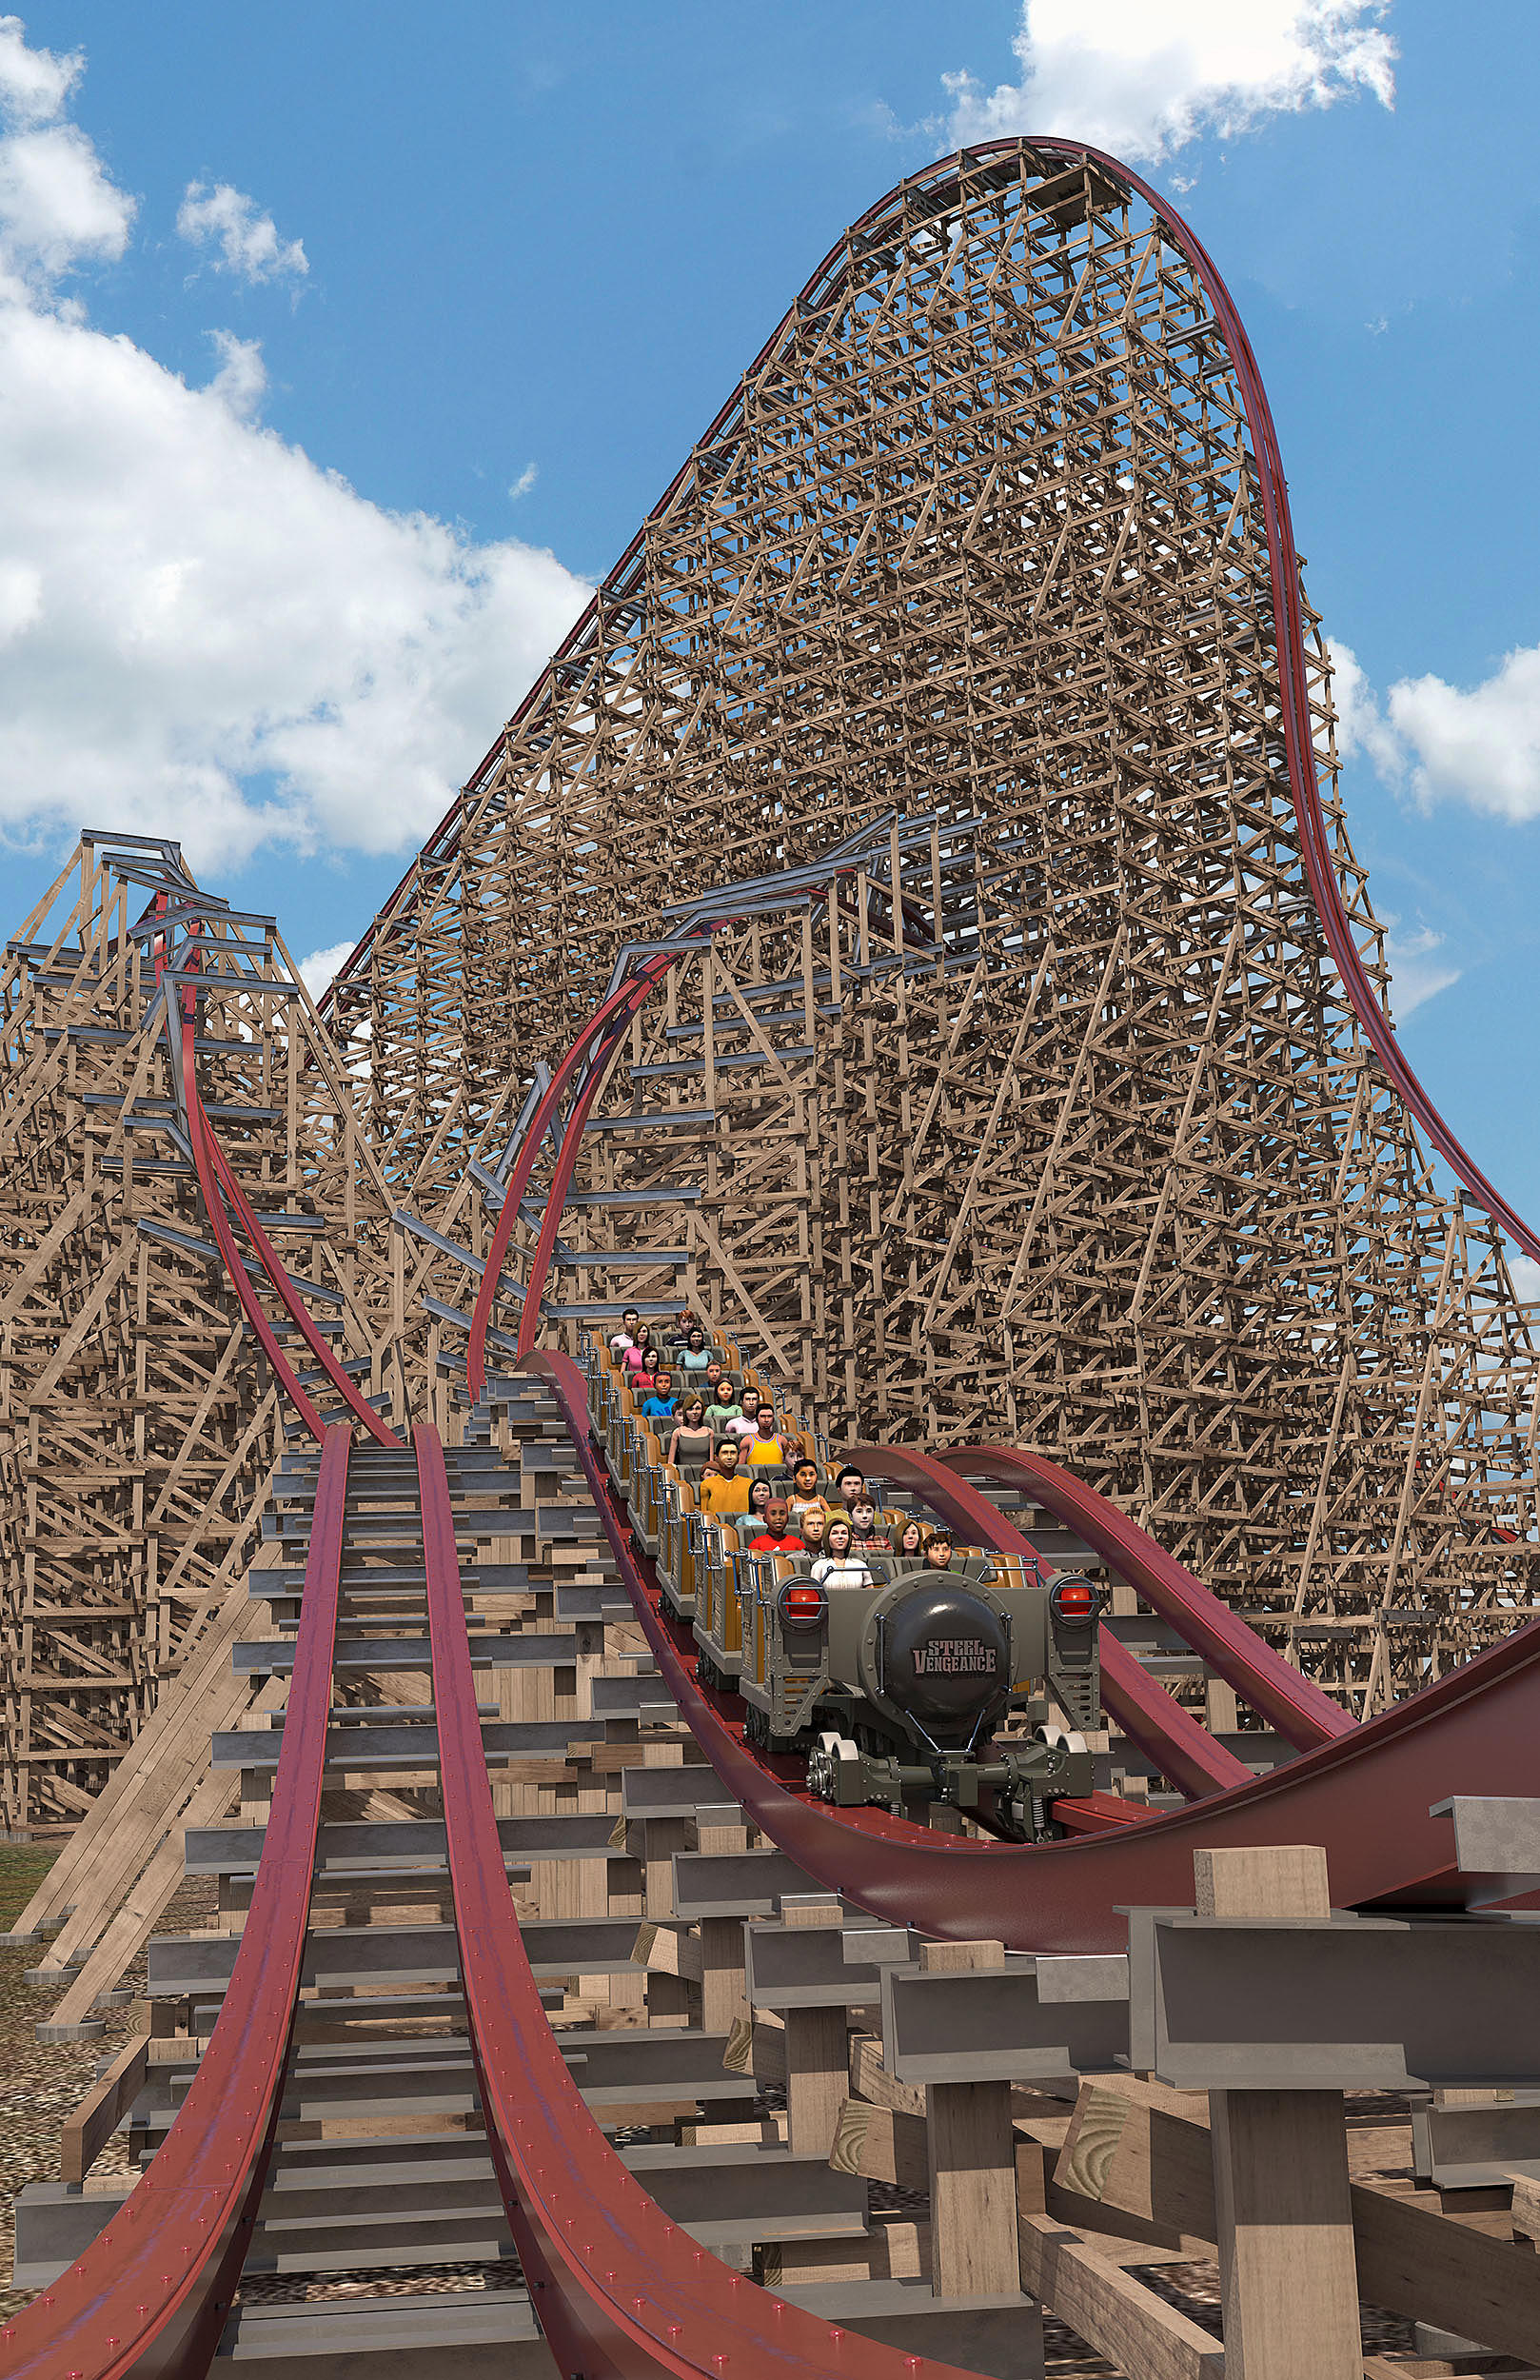 Roller Coaster Fanatics: Are You Ready For 'Steel Vengeance'?